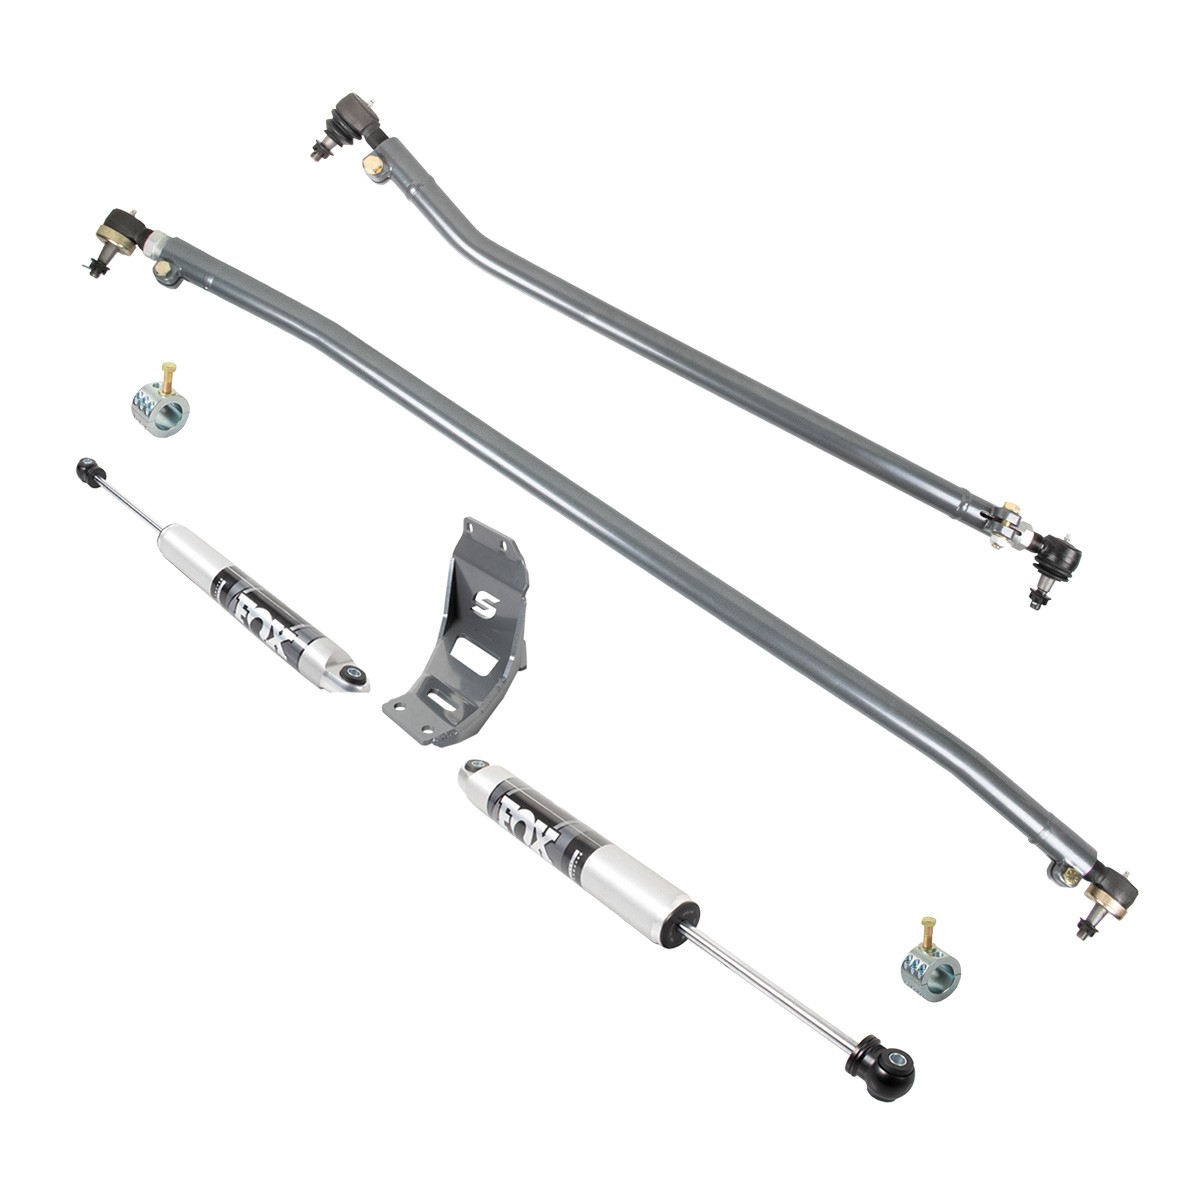 Ram Steering Kit Shown with dual Stabilizer Kit 8710-03